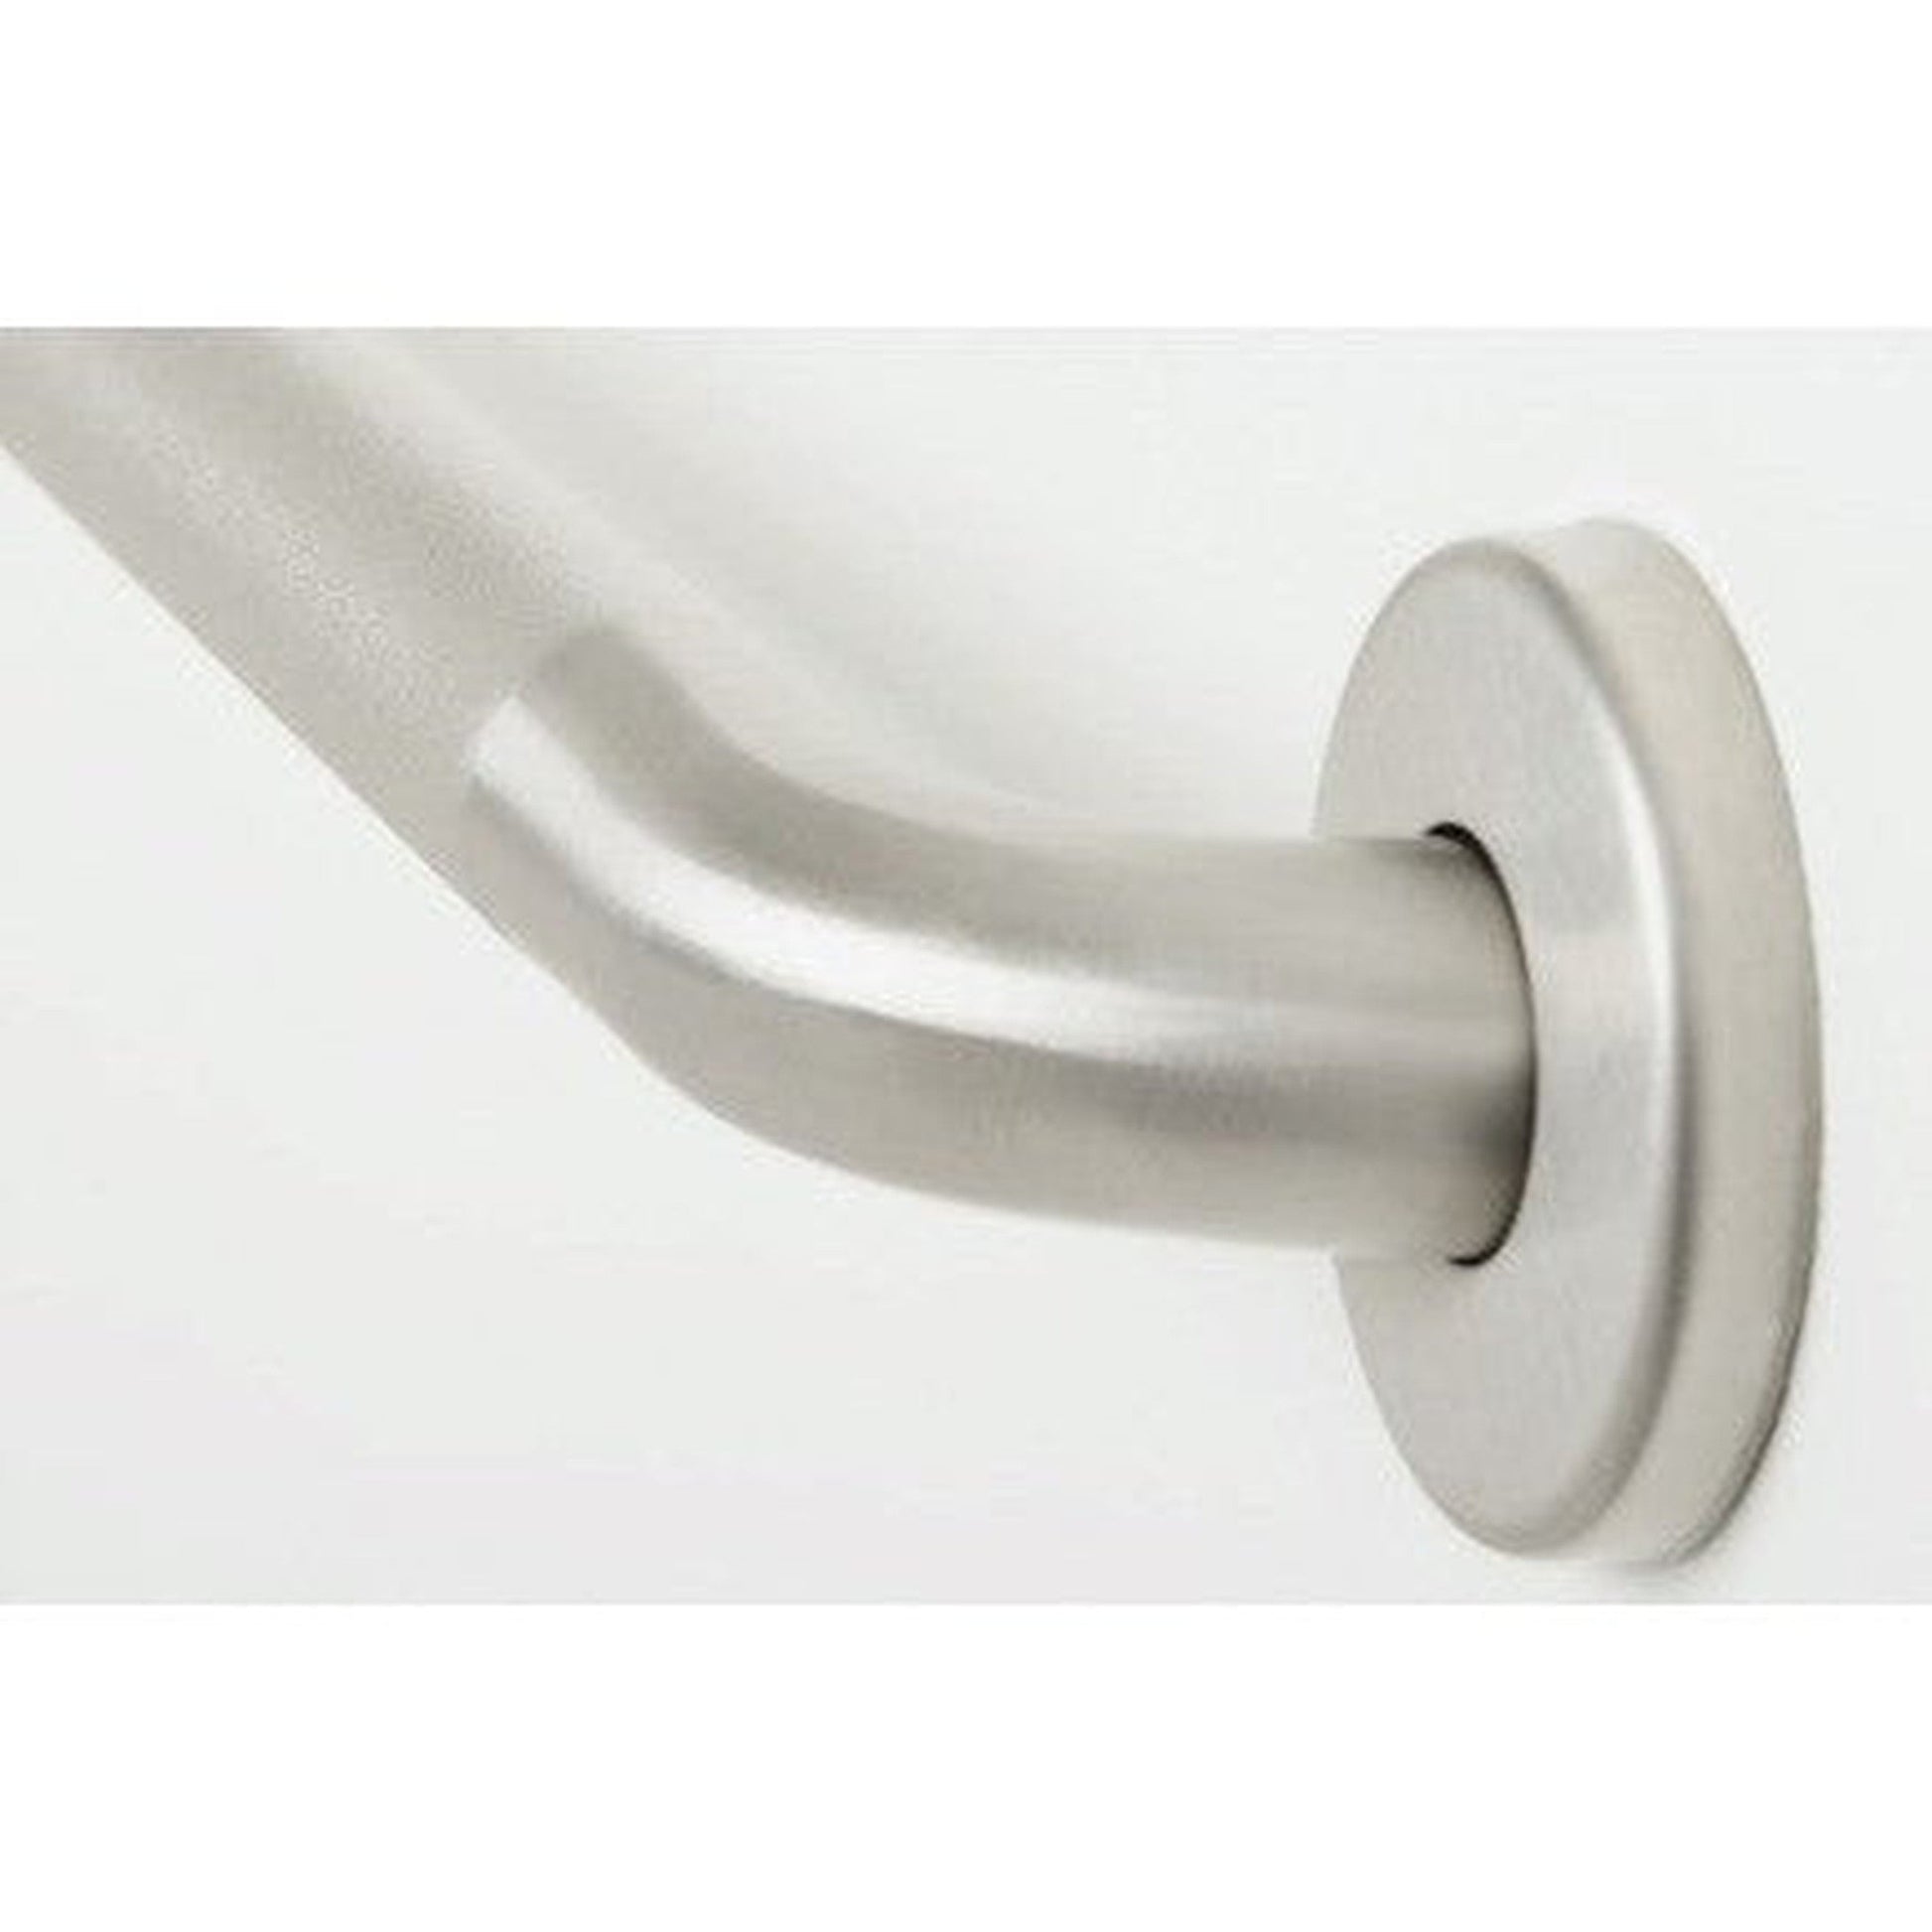 Seachrome Signature GY Series 30" Peened With Satin Stainless Steel Ends 1.25" Tube Diameter Straight Grab Bar